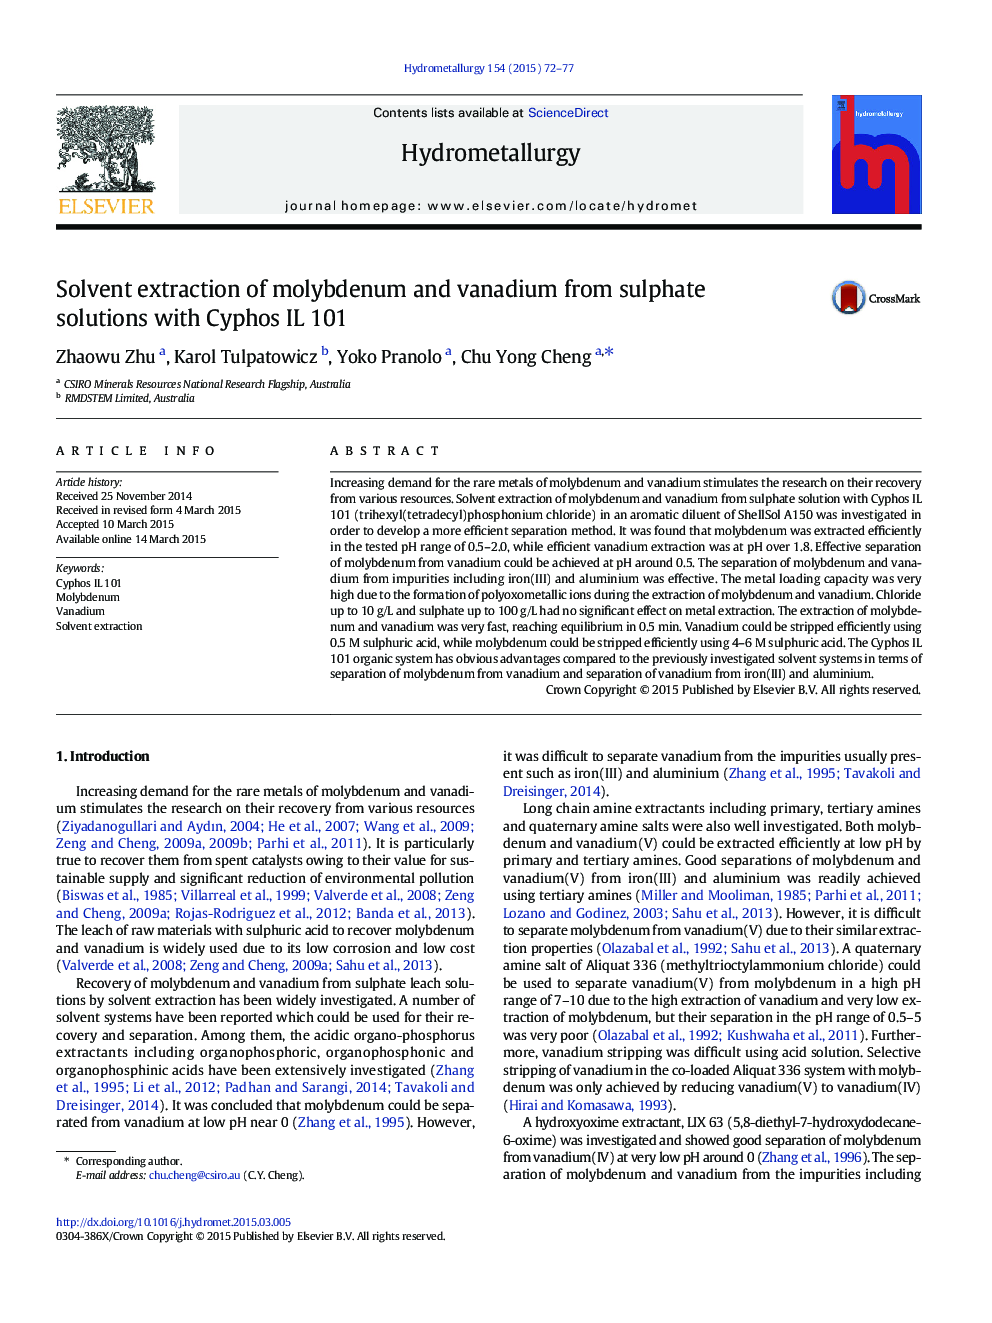 Solvent extraction of molybdenum and vanadium from sulphate solutions with Cyphos IL 101